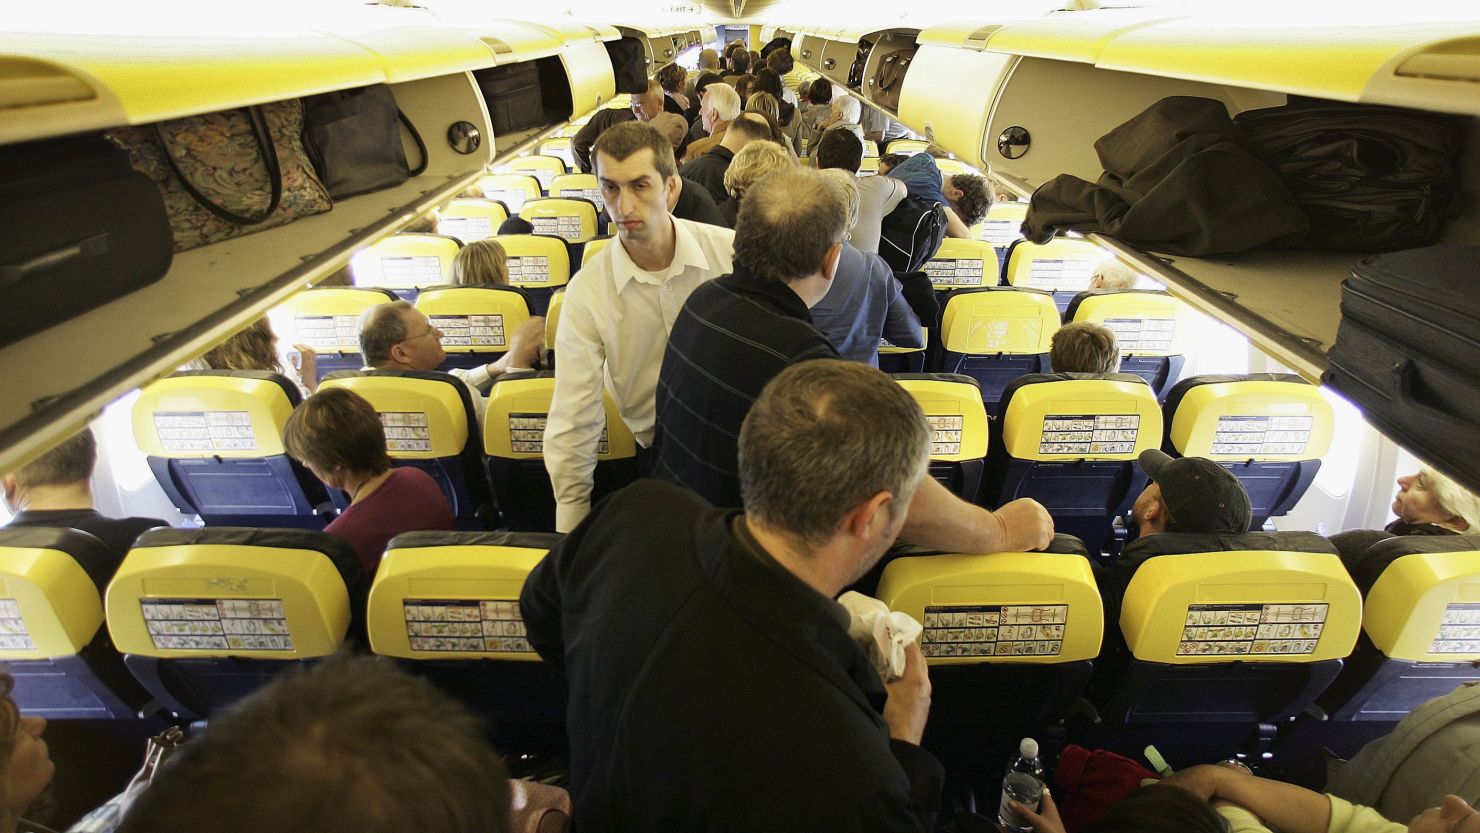 'Please take your seats, and just chill out.' Air travel can be far from relaxing.